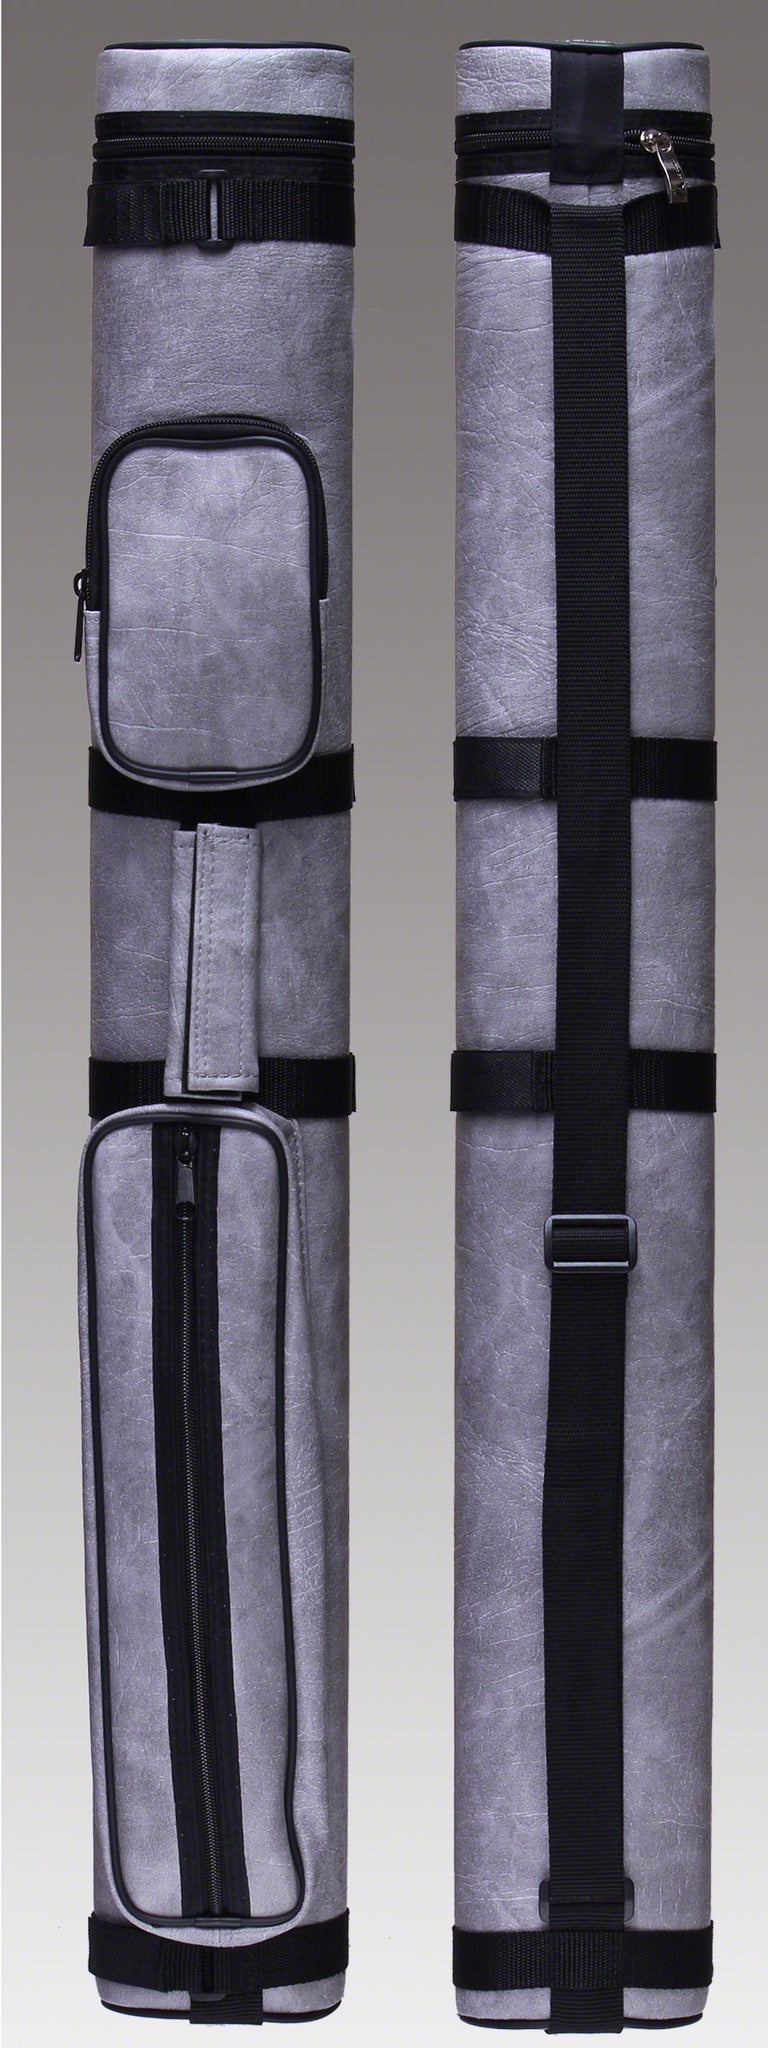 Pro Series Traditional Grey 2x2 Pool Cue Case